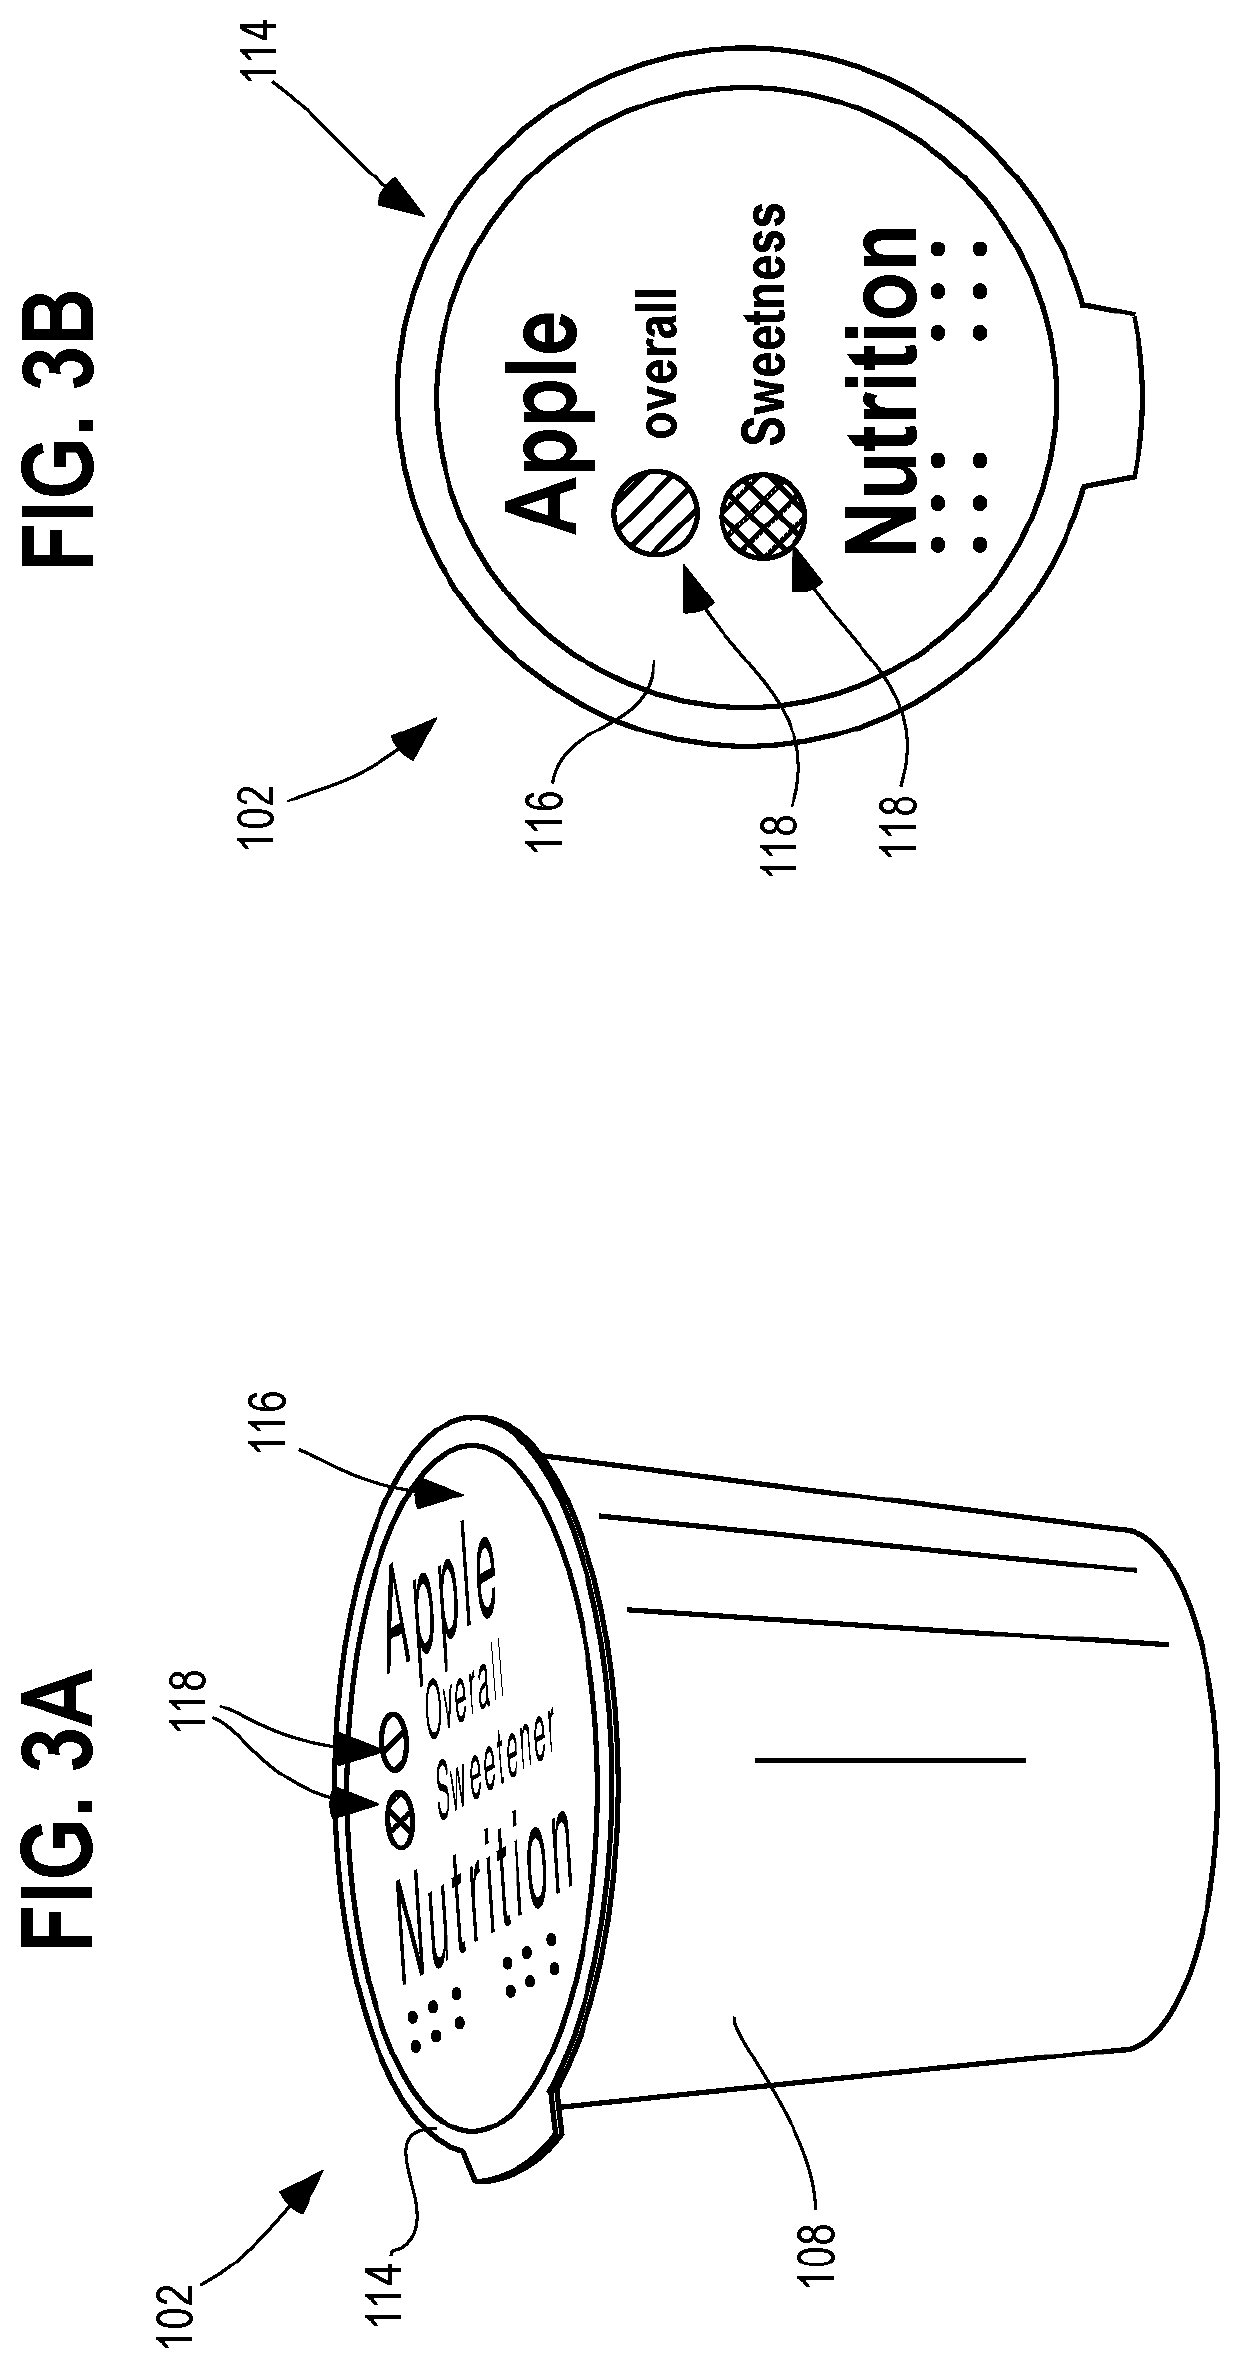 System and method for creating consumable juice products